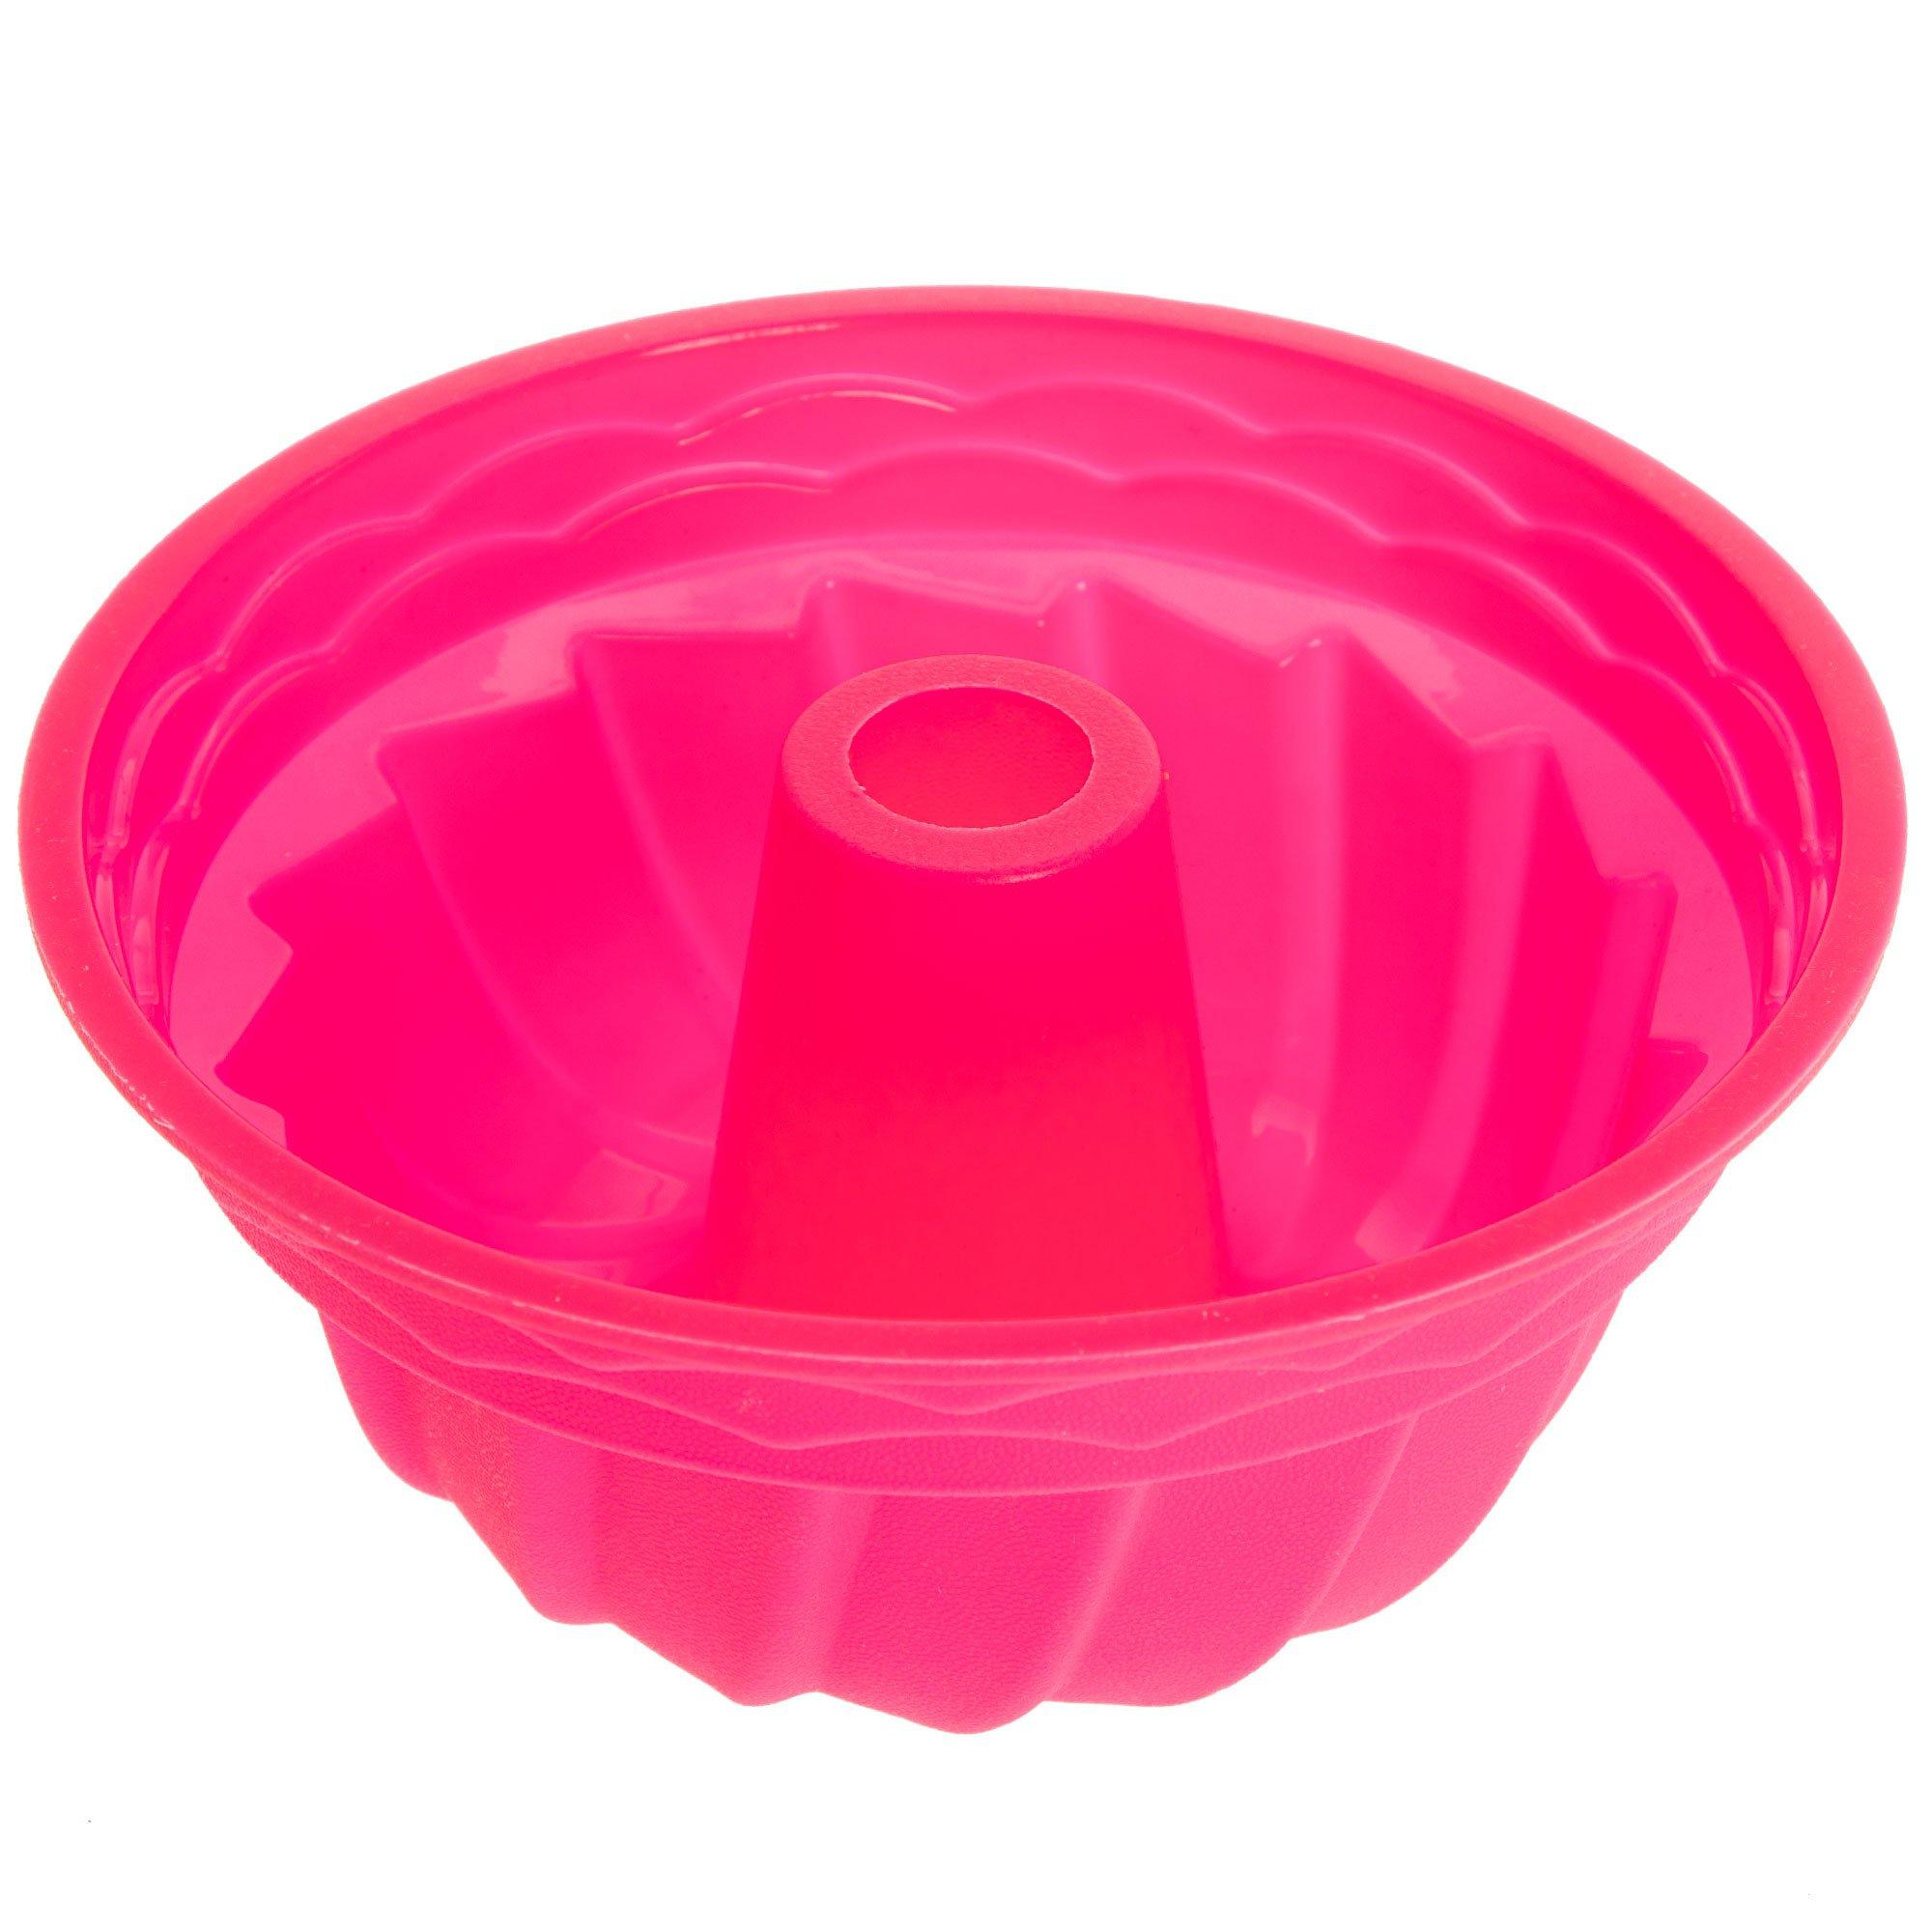 SHEIN Basic living 1Pc update style Silicone Bundt Cake Pan Mould,Non Stick  Chiffon Cake Mold,For Kitchen Bakeware